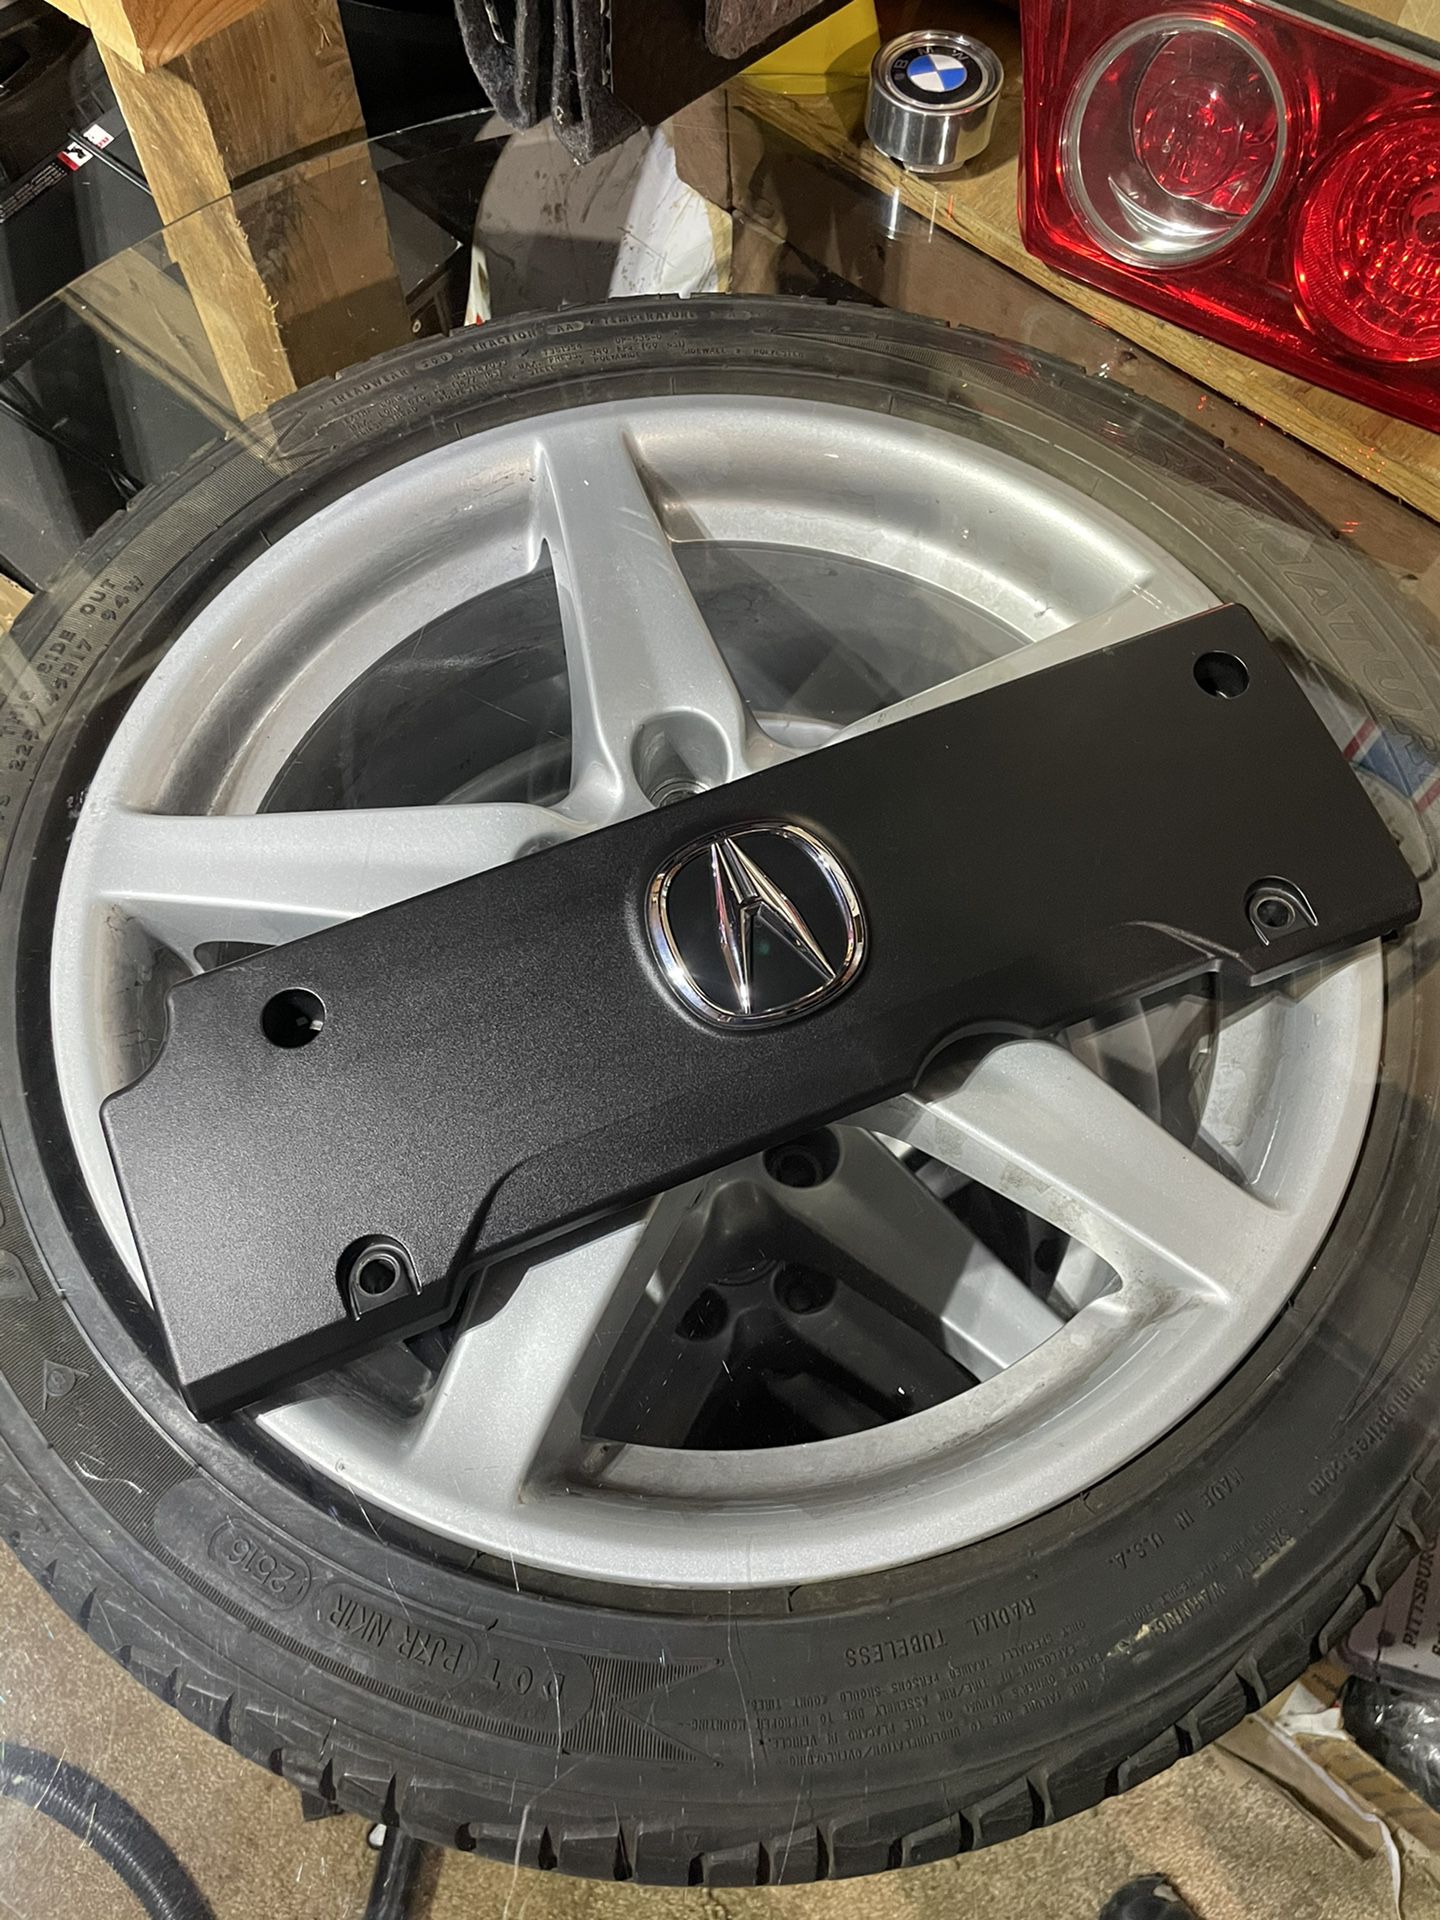 09-14 TSX Coil Cover 